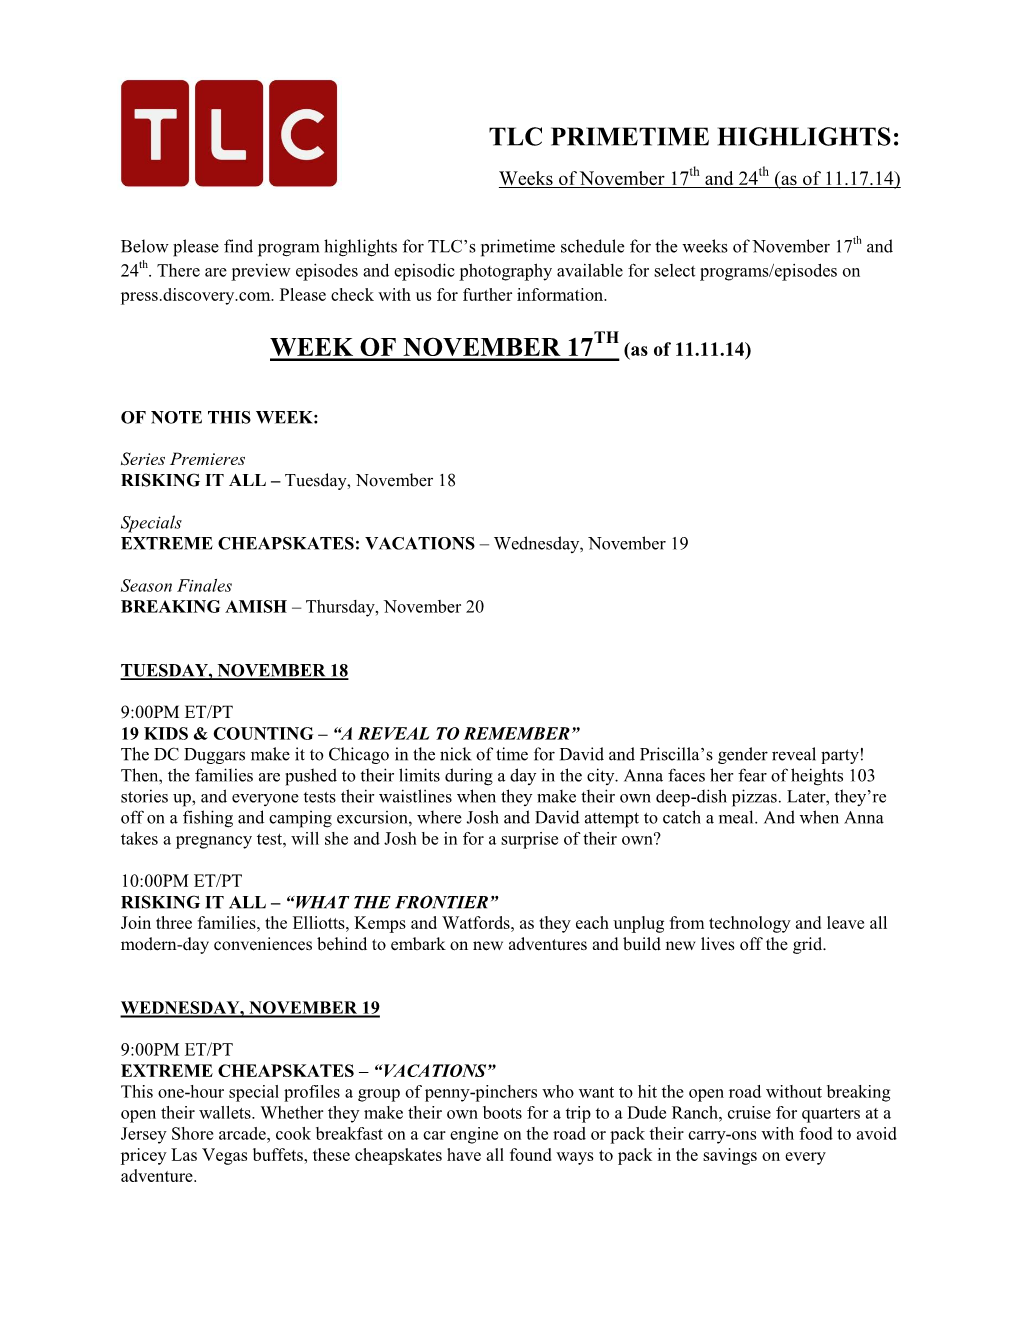 TLC PRIMETIME HIGHLIGHTS: Weeks of November 17Th and 24Th (As of 11.17.14)